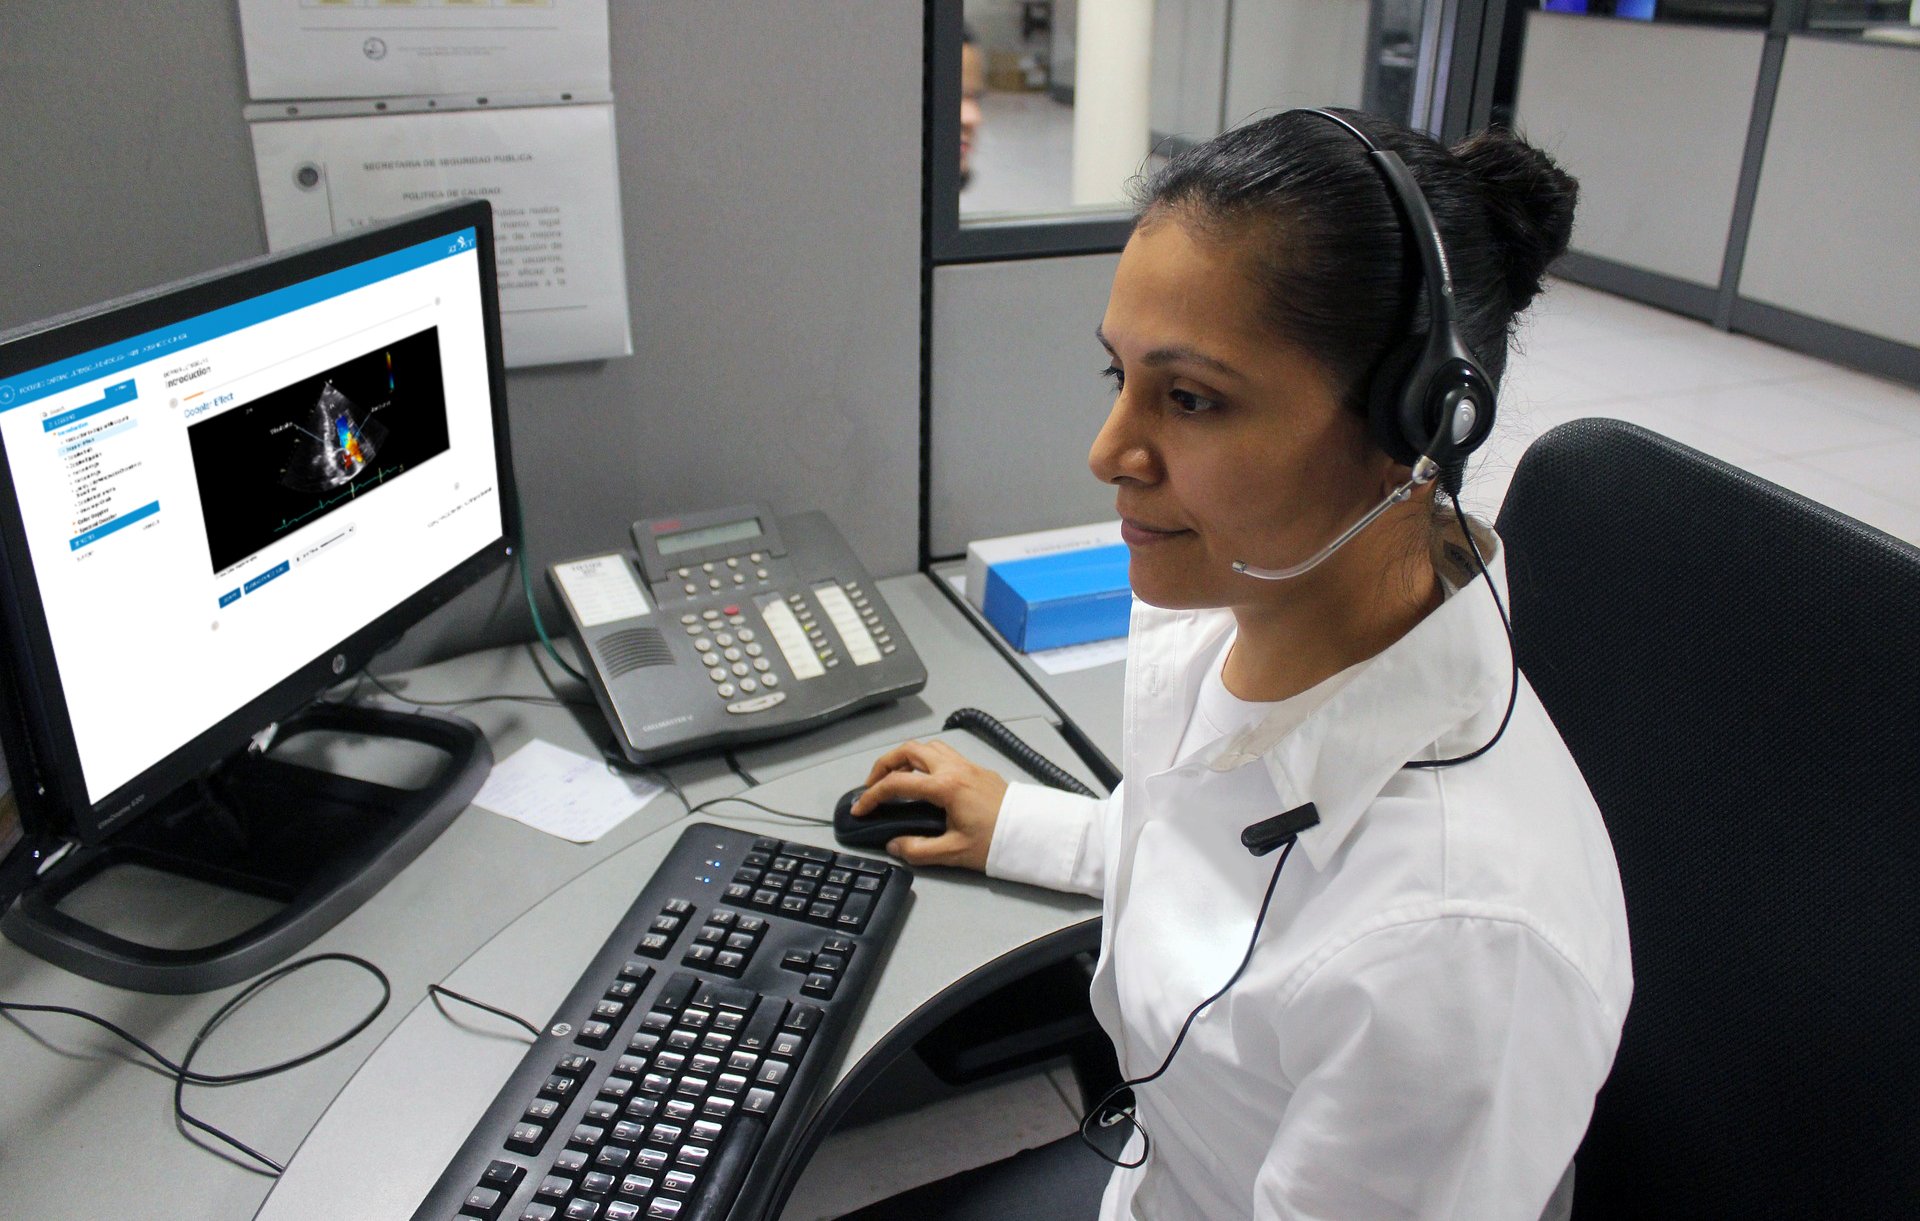 SonoSim support member online and ready to address your questions